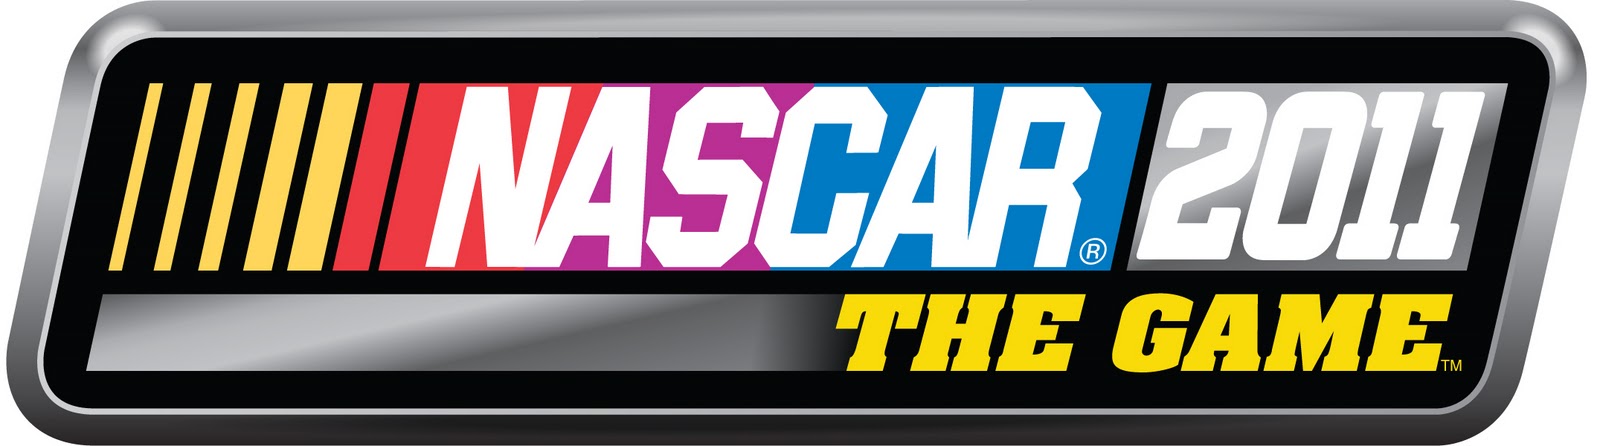 nascar wii 2011. NASCAR The Game 2011 is